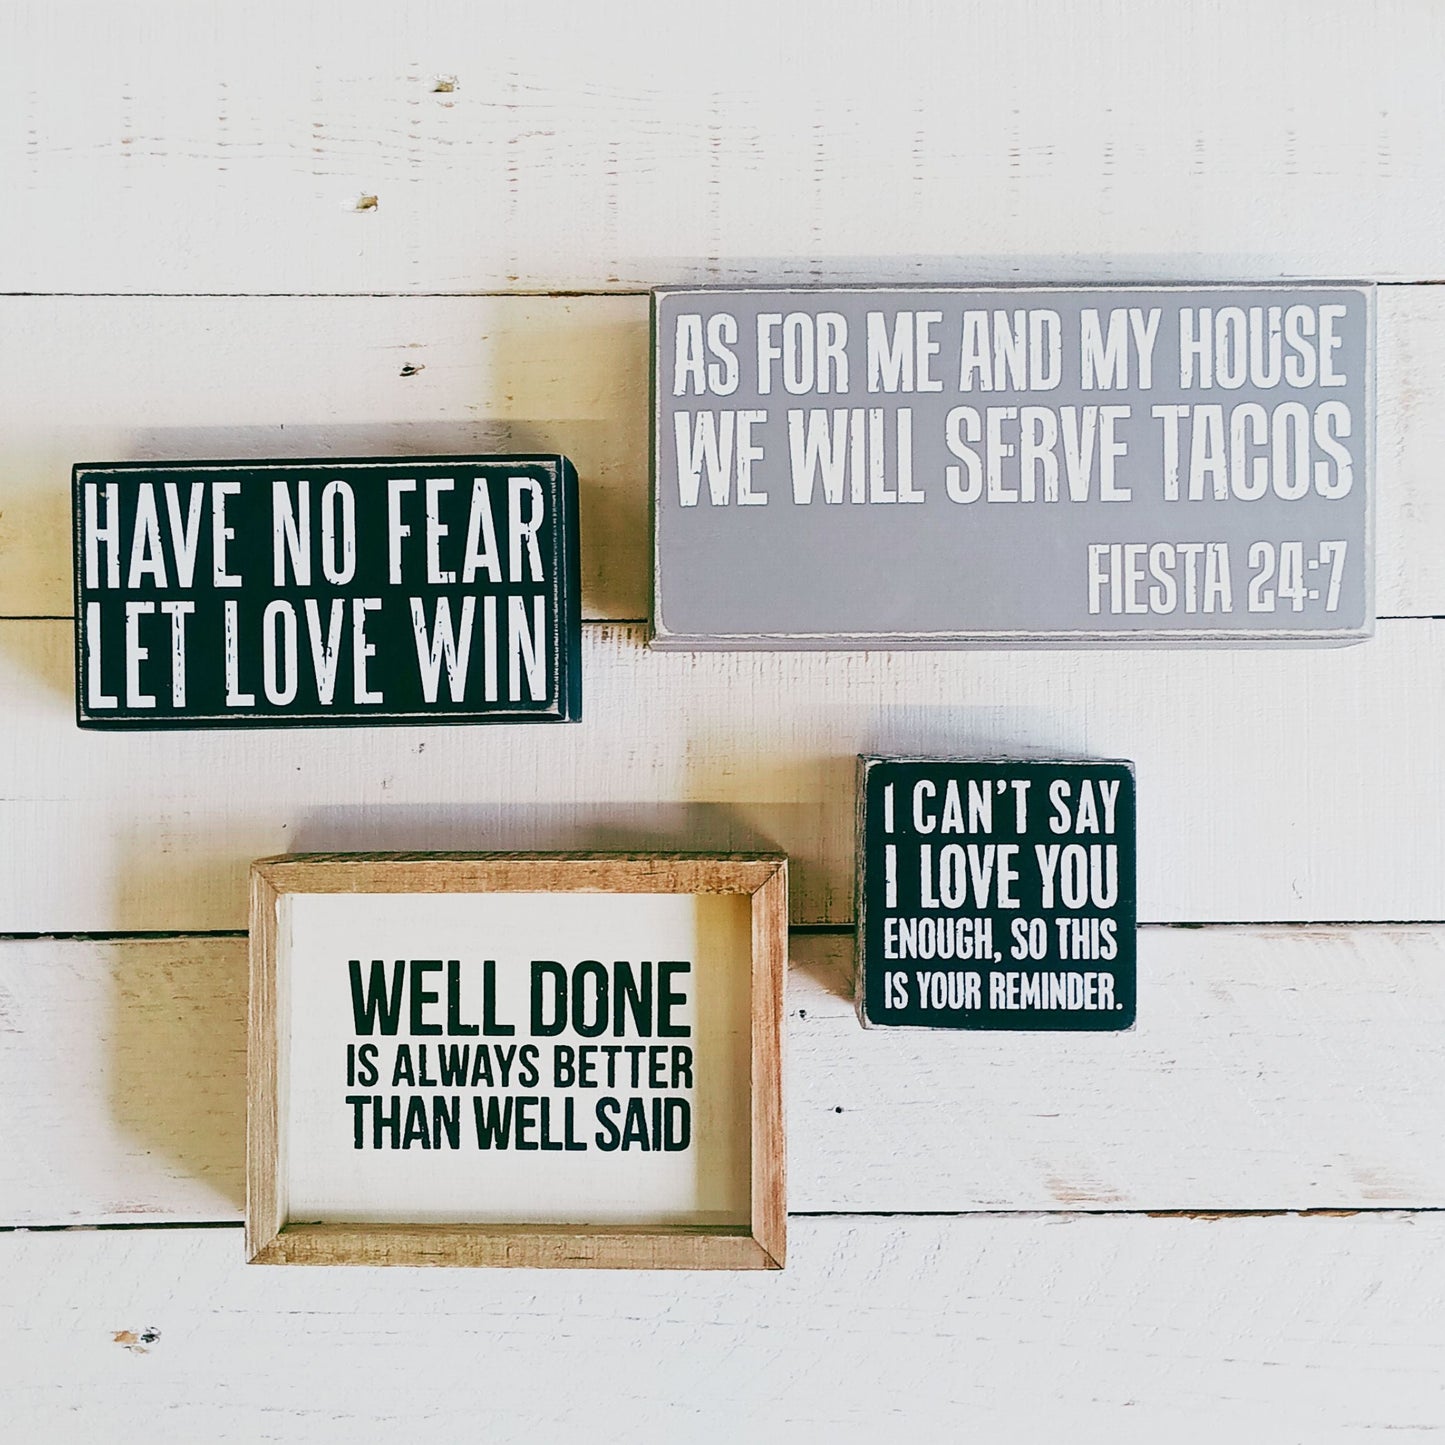 As For Me And My House We Will Serve Tacos Fiesta 24:7 Box Sign | Classic Gray Wooden Desk Wall Decor | 8" x 4"